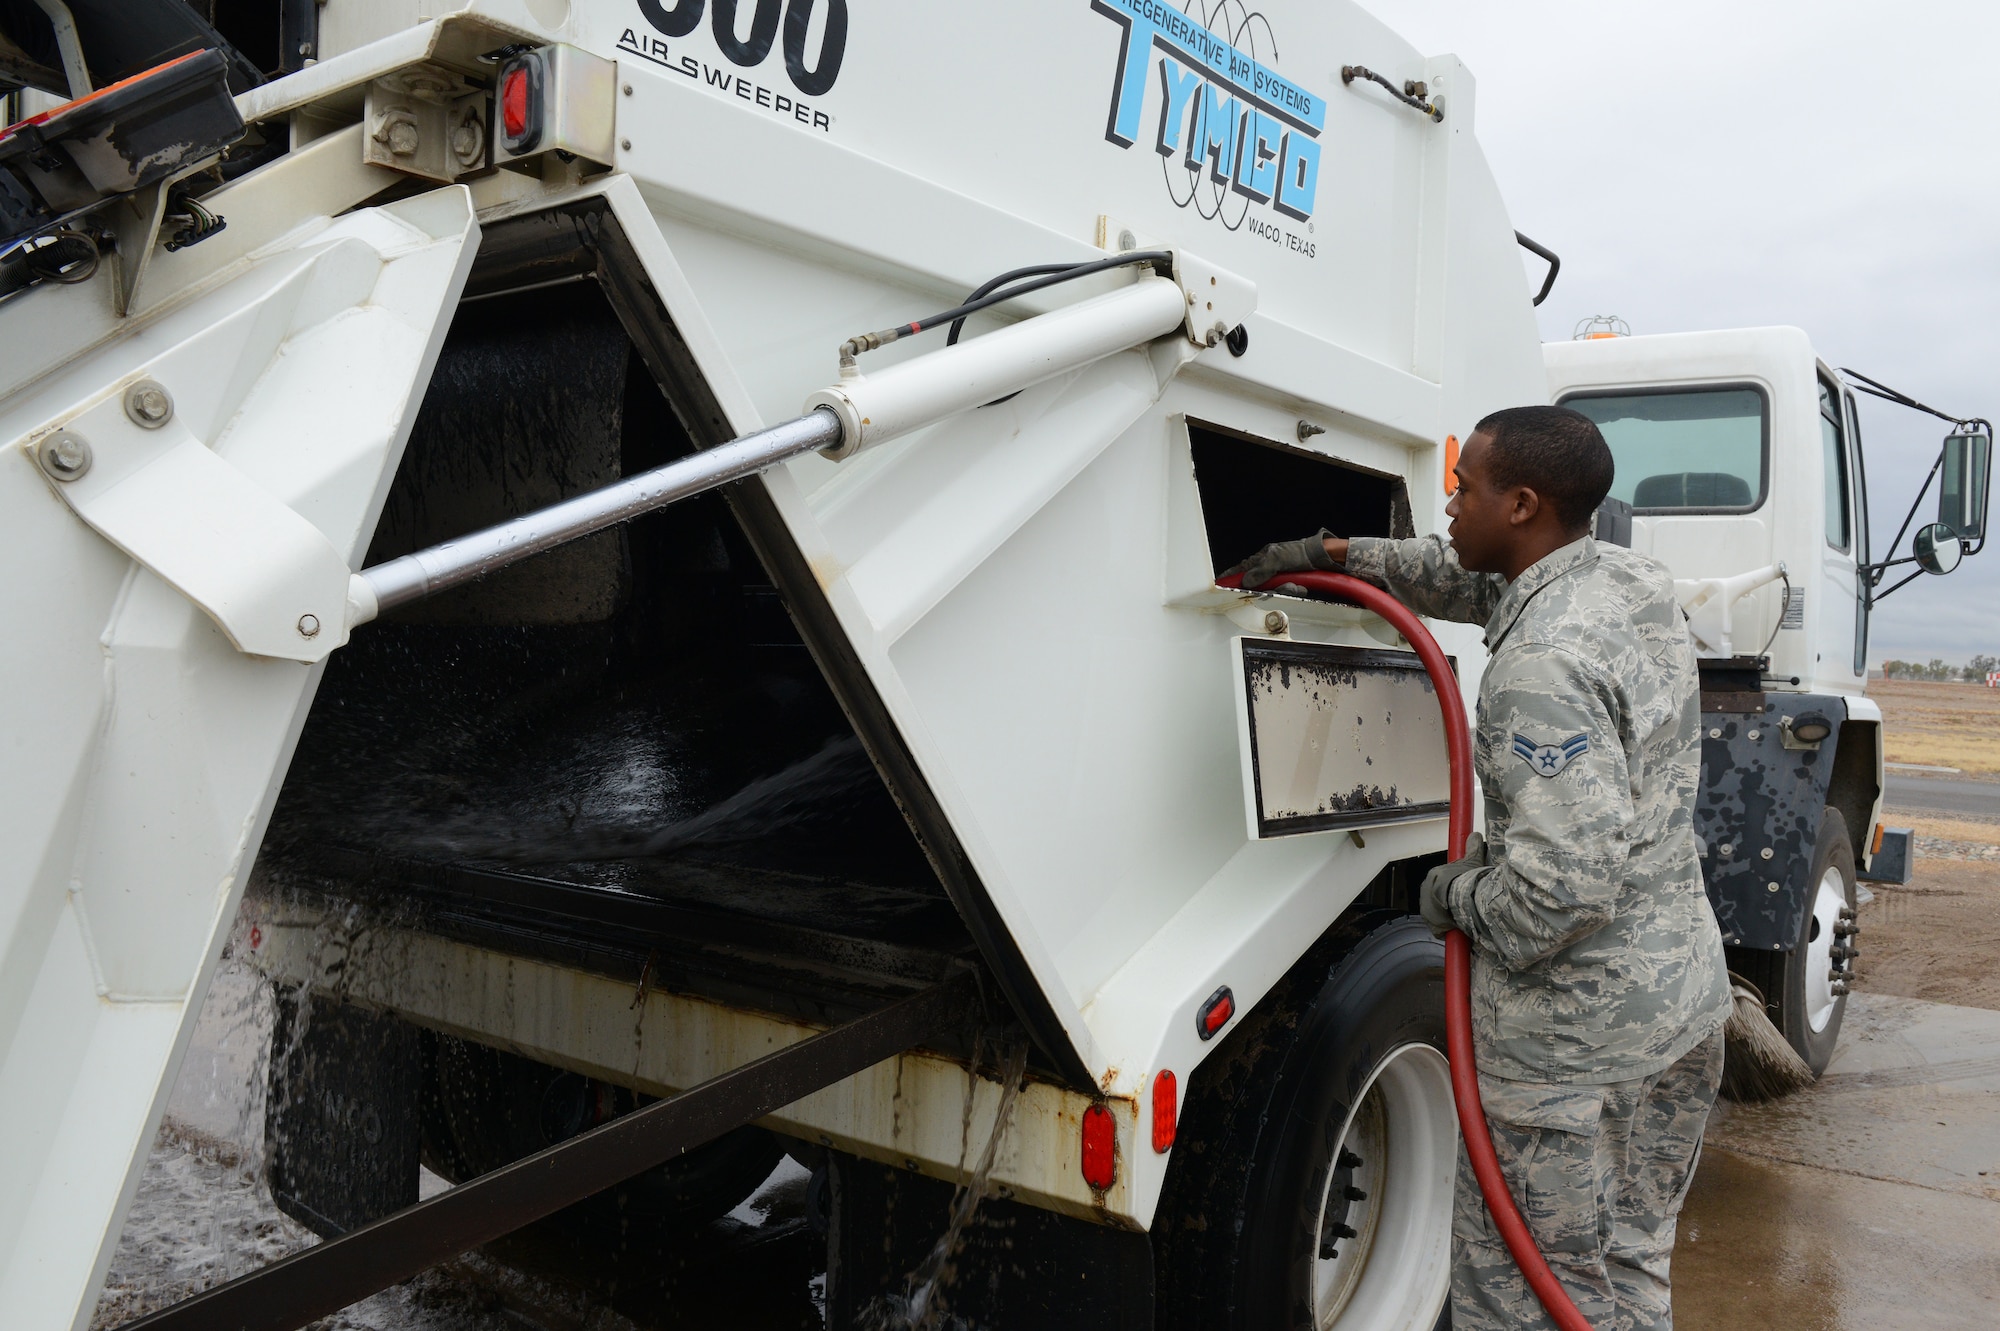 Airman 1st Class Demetrius Smith, 56th Civil Engineer Squadron heavy equipment operator, washes a street sweeper at Luke Air Force Base, Ariz., Jan. 5, 2016. Street sweepers are used more often after storms hit the base to help clean the streets. (U.S. Air Force photo by Senior Airman James Hensley)